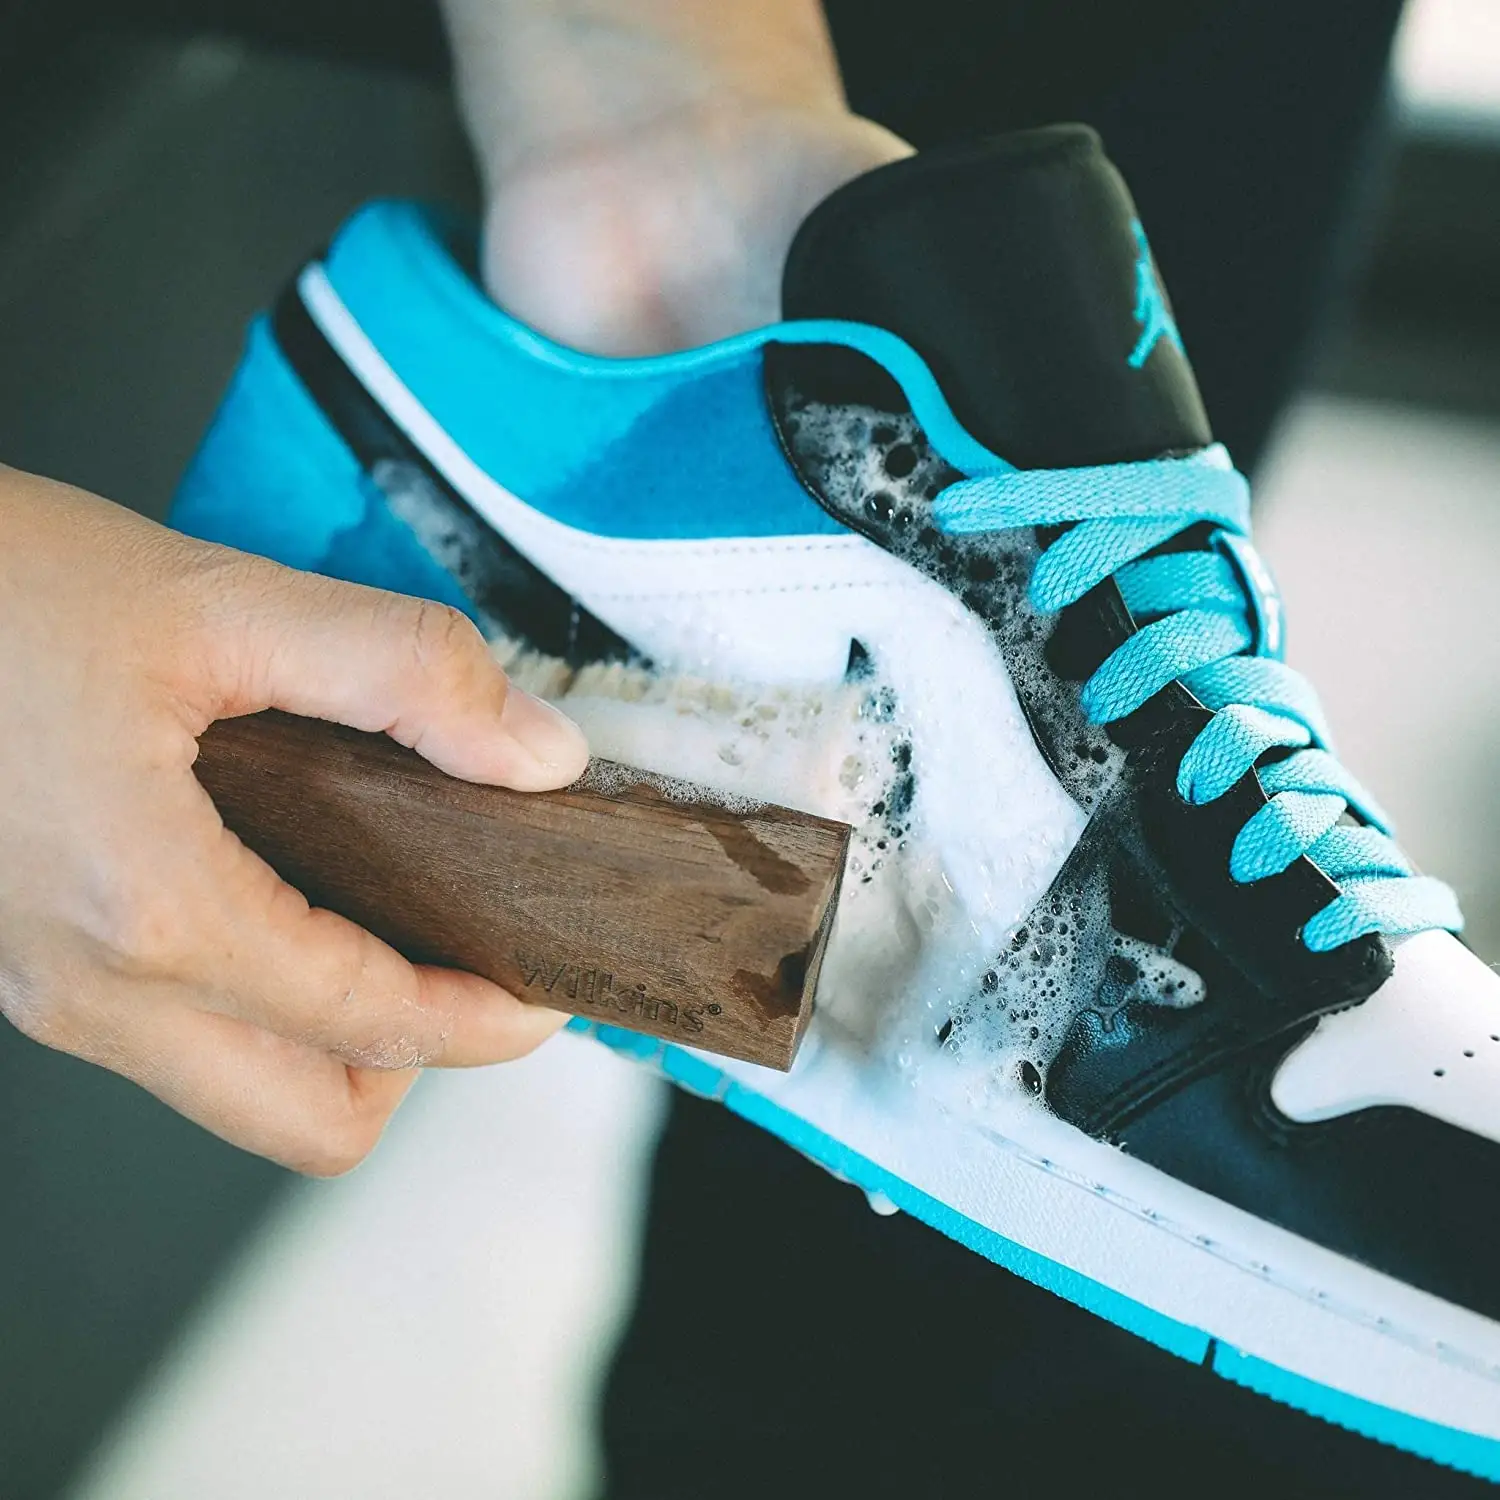 How to clean colored shoes with baking soda